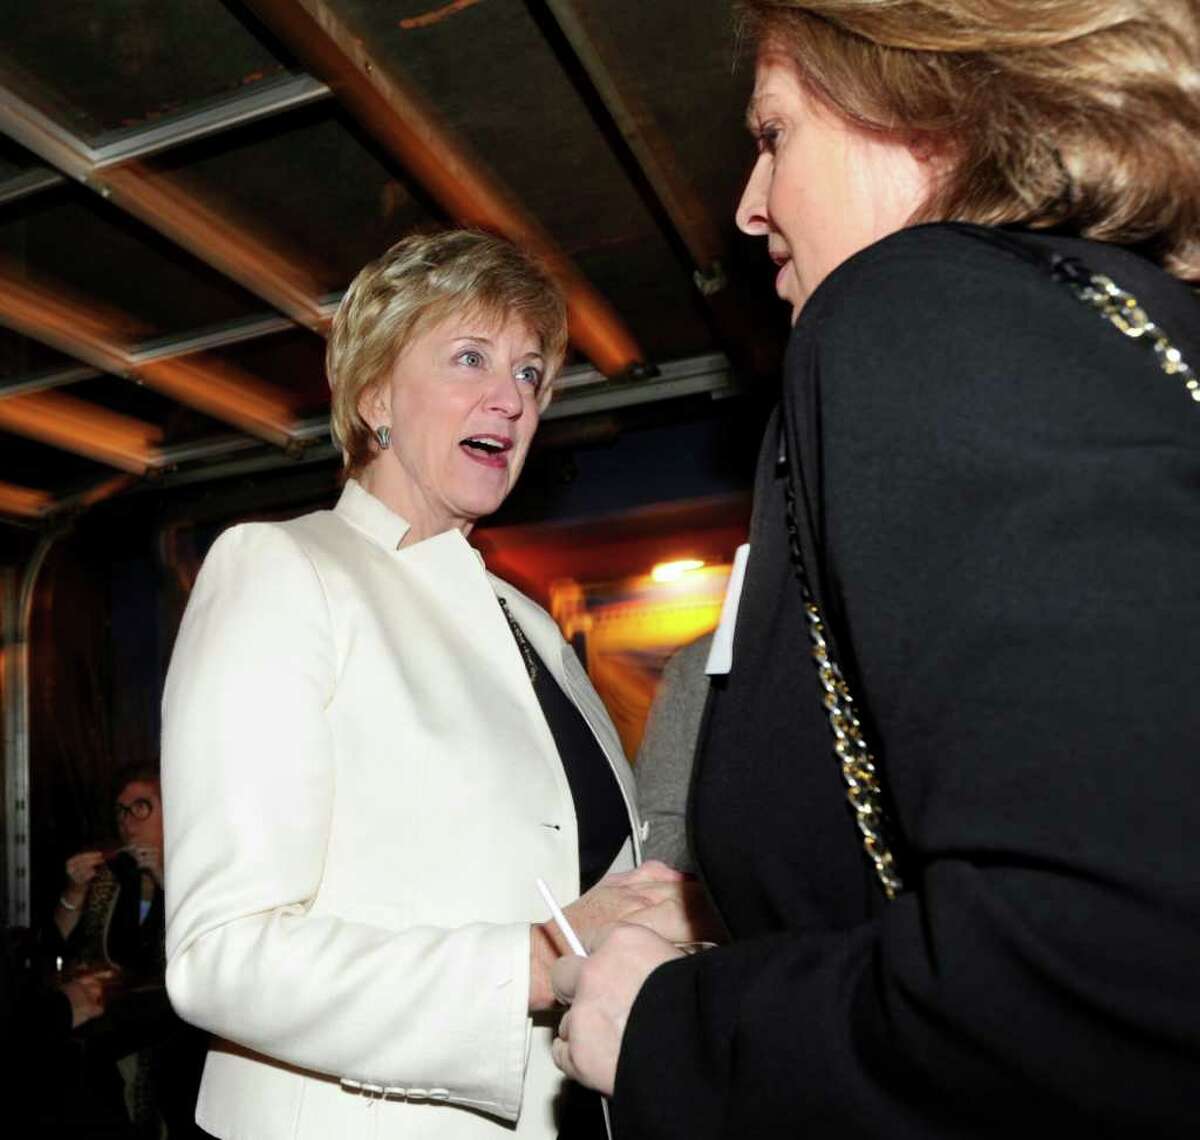 Republican U.S. Senate candidate Linda McMahon, left, meets Clare Powell of Stamford during an appearance in Stamford Feb. 2, 2012.